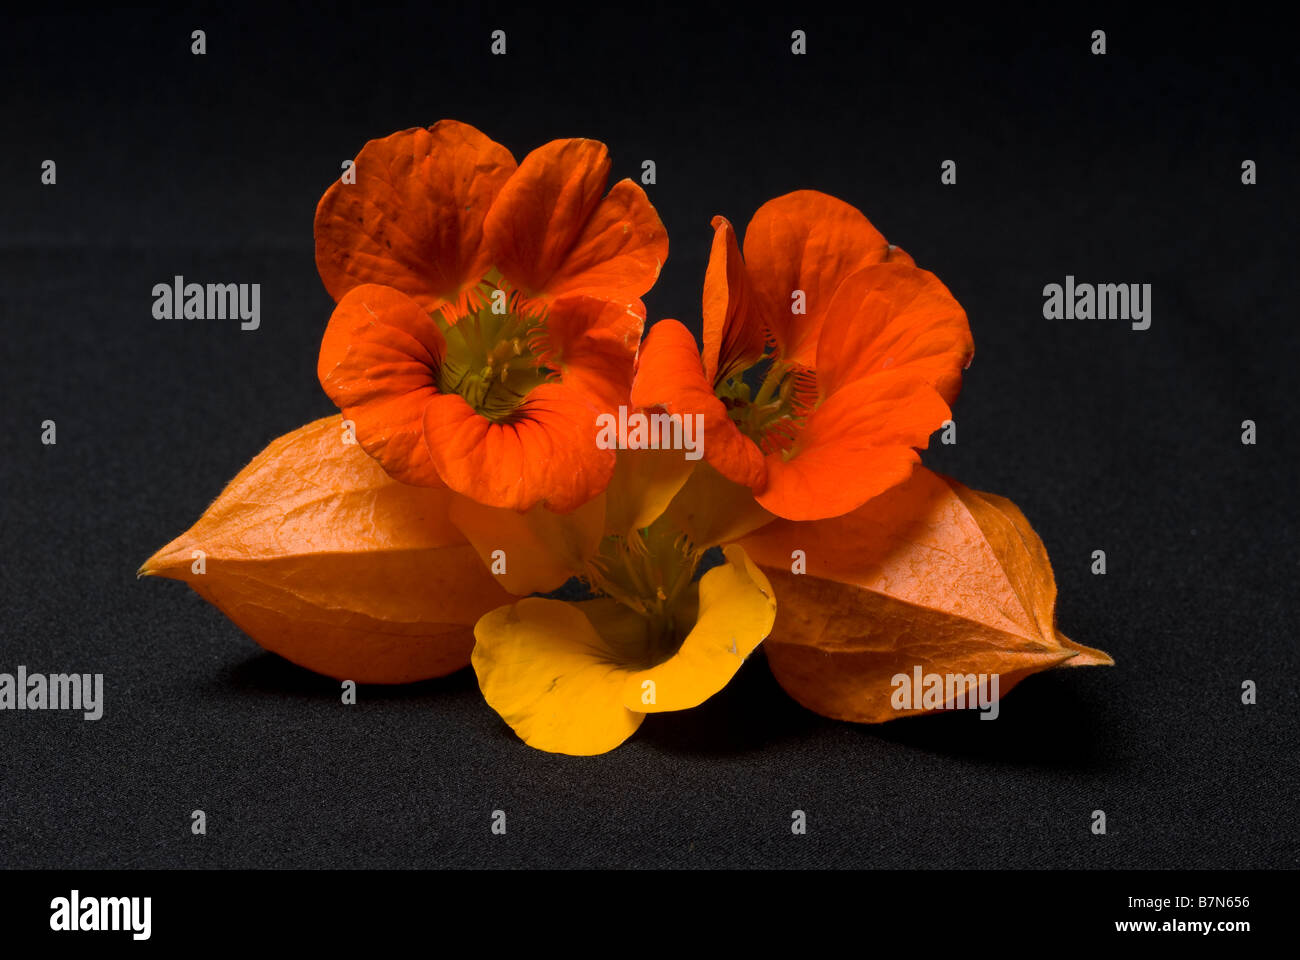 Stylish composition of flowers in a studio Stock Photo